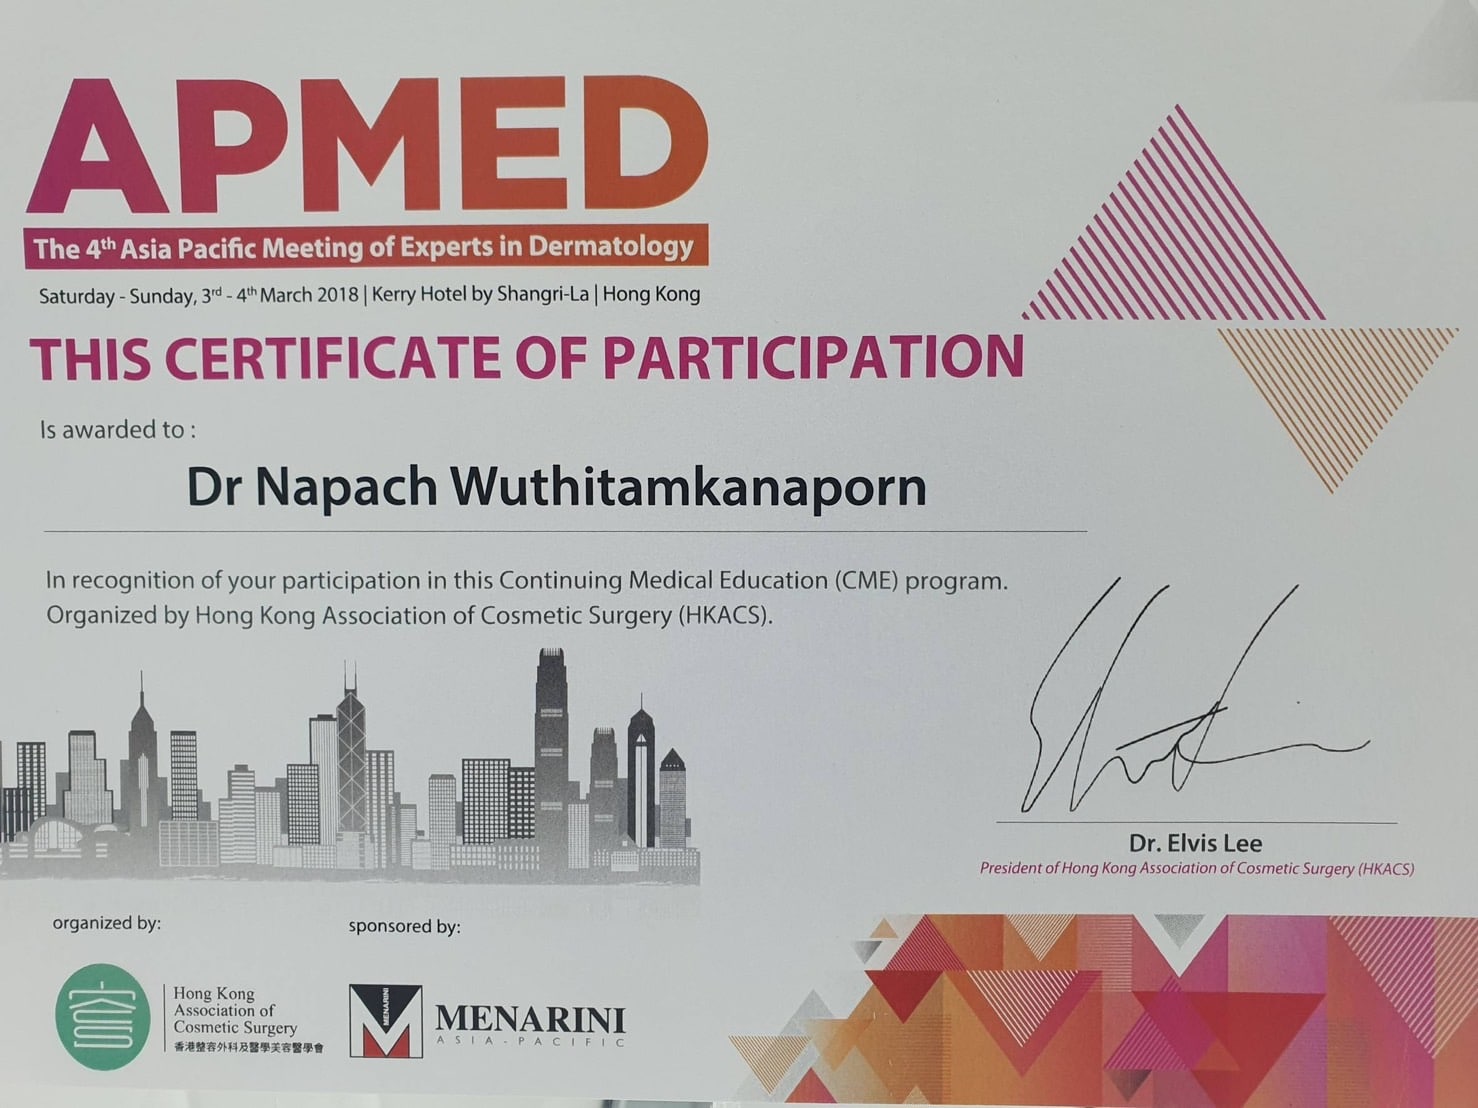 dr-Napach-wuthitamkanaporn-certification-and-traning-4